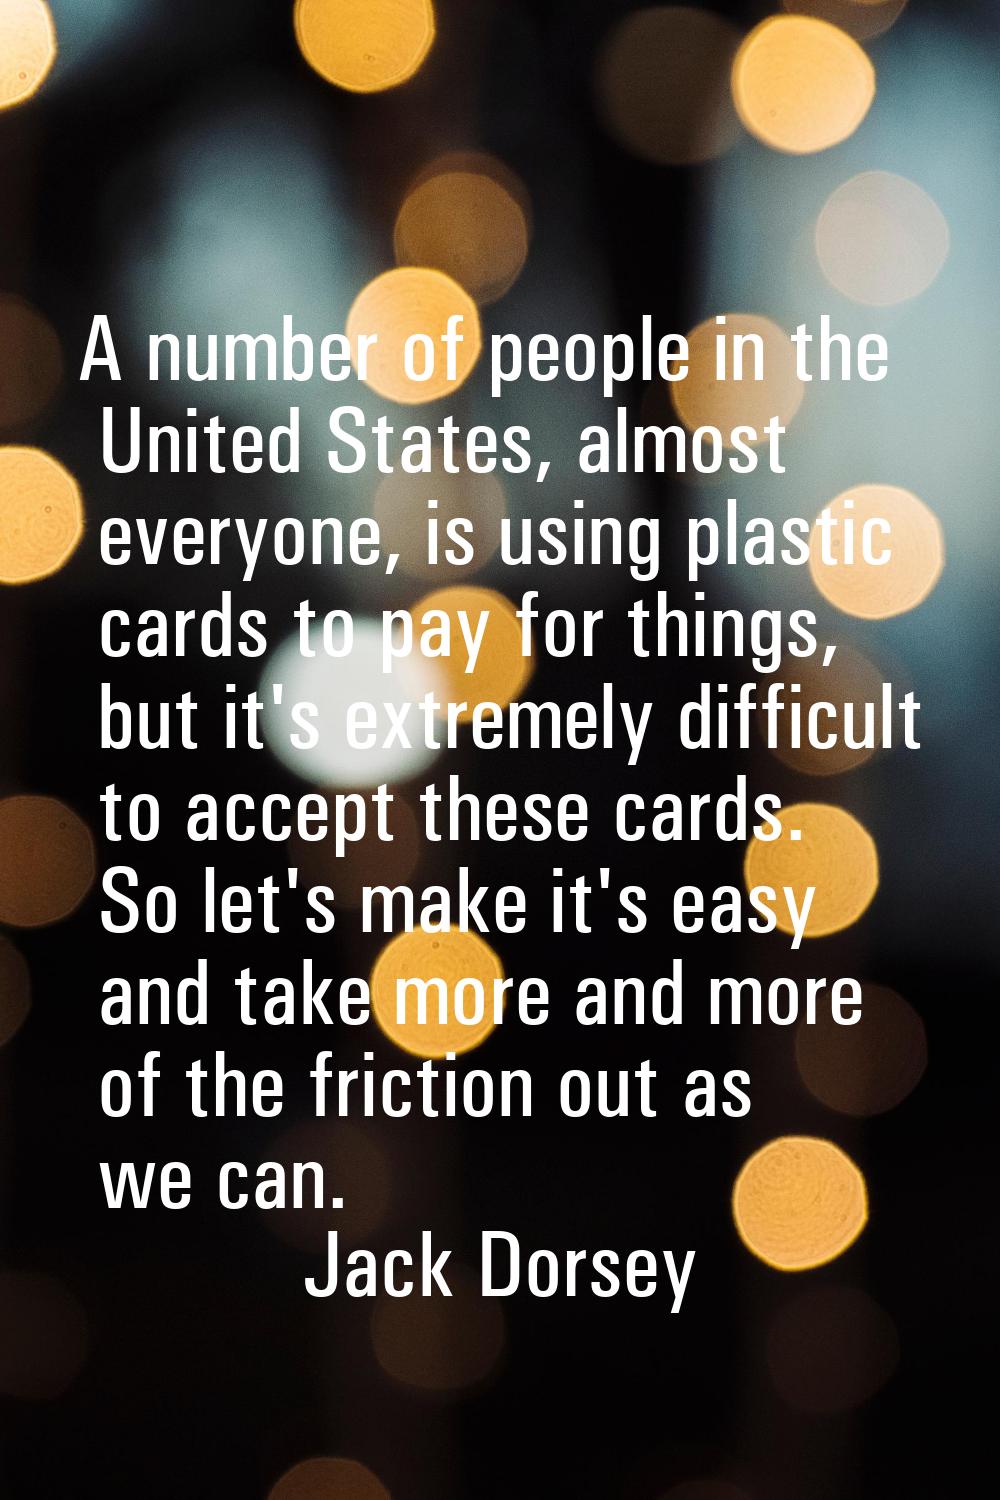 A number of people in the United States, almost everyone, is using plastic cards to pay for things,